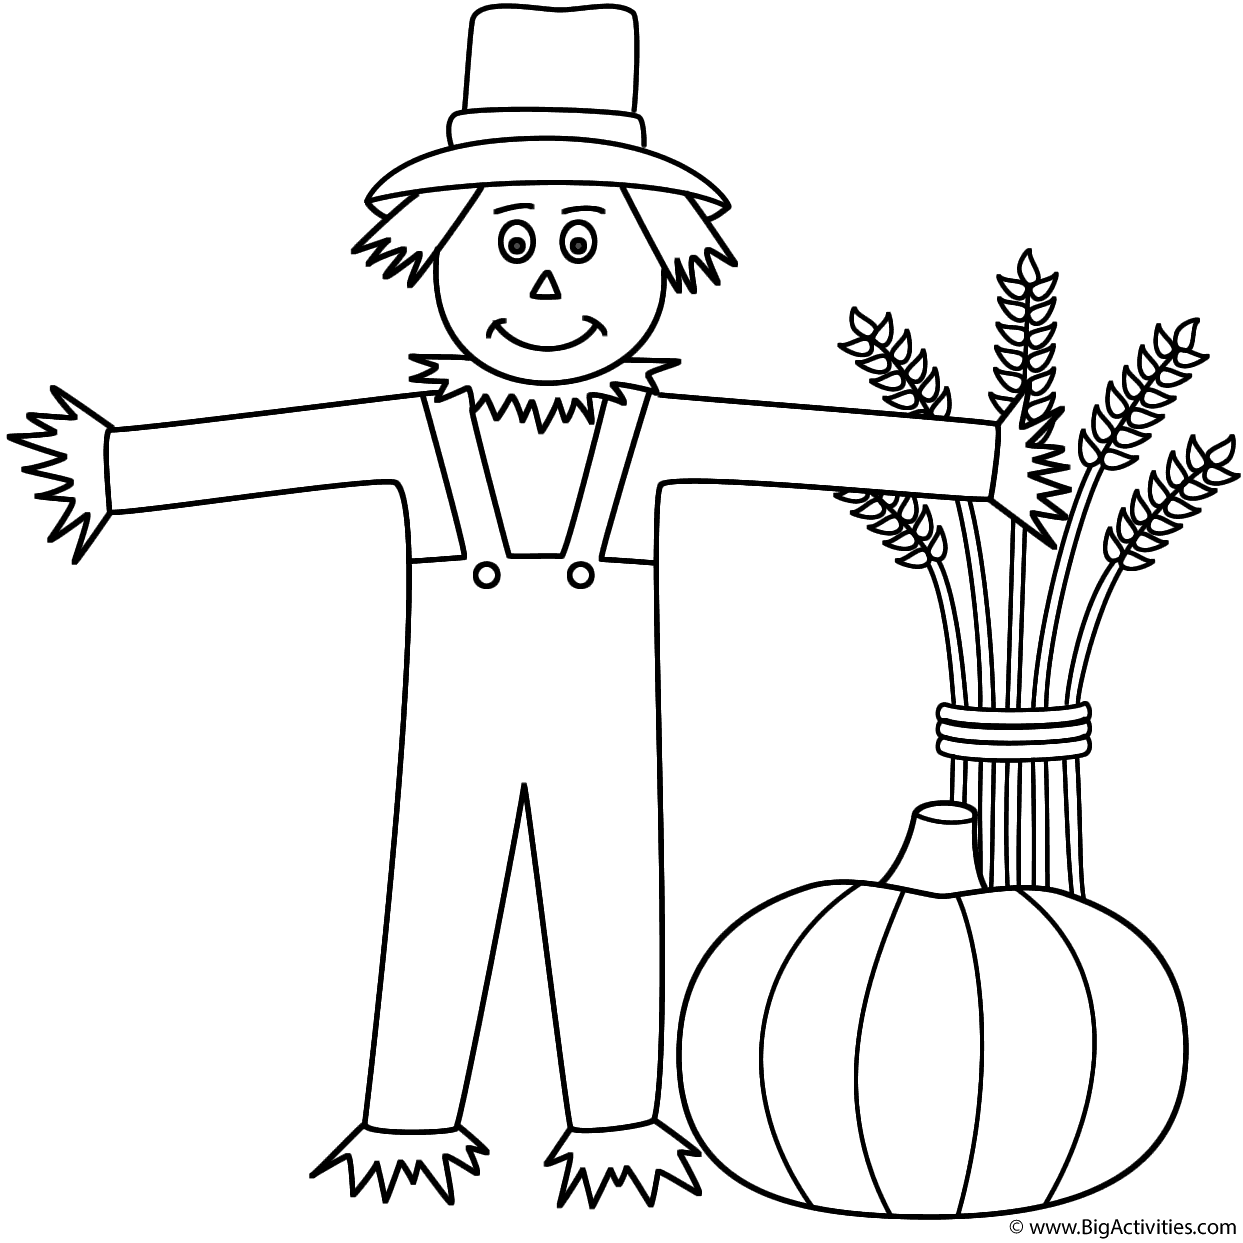 Scarecrow with wheat sheaf and pumpkin